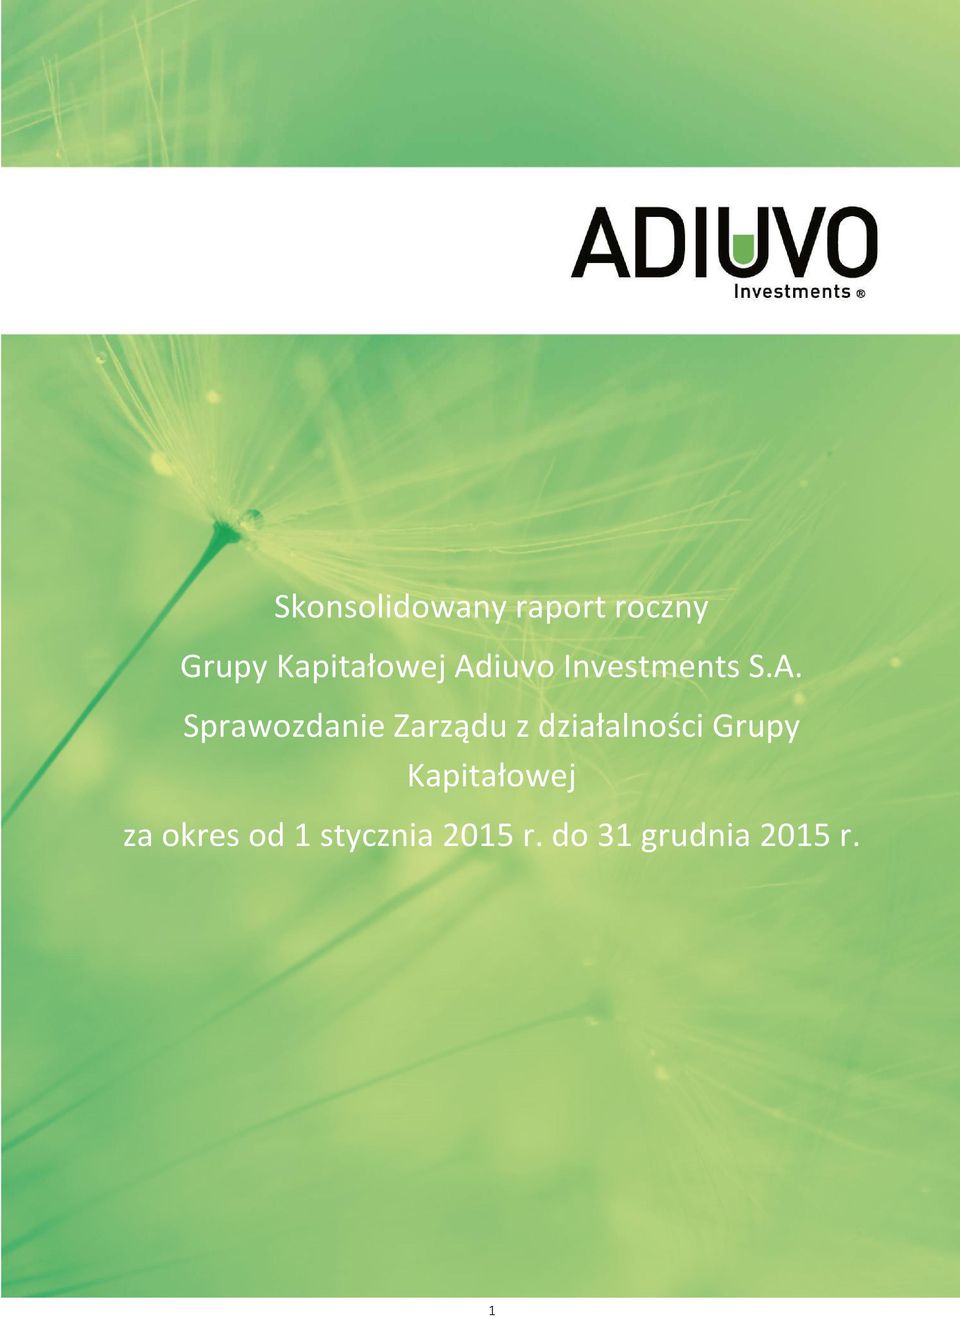 iuvo Investments S.A.